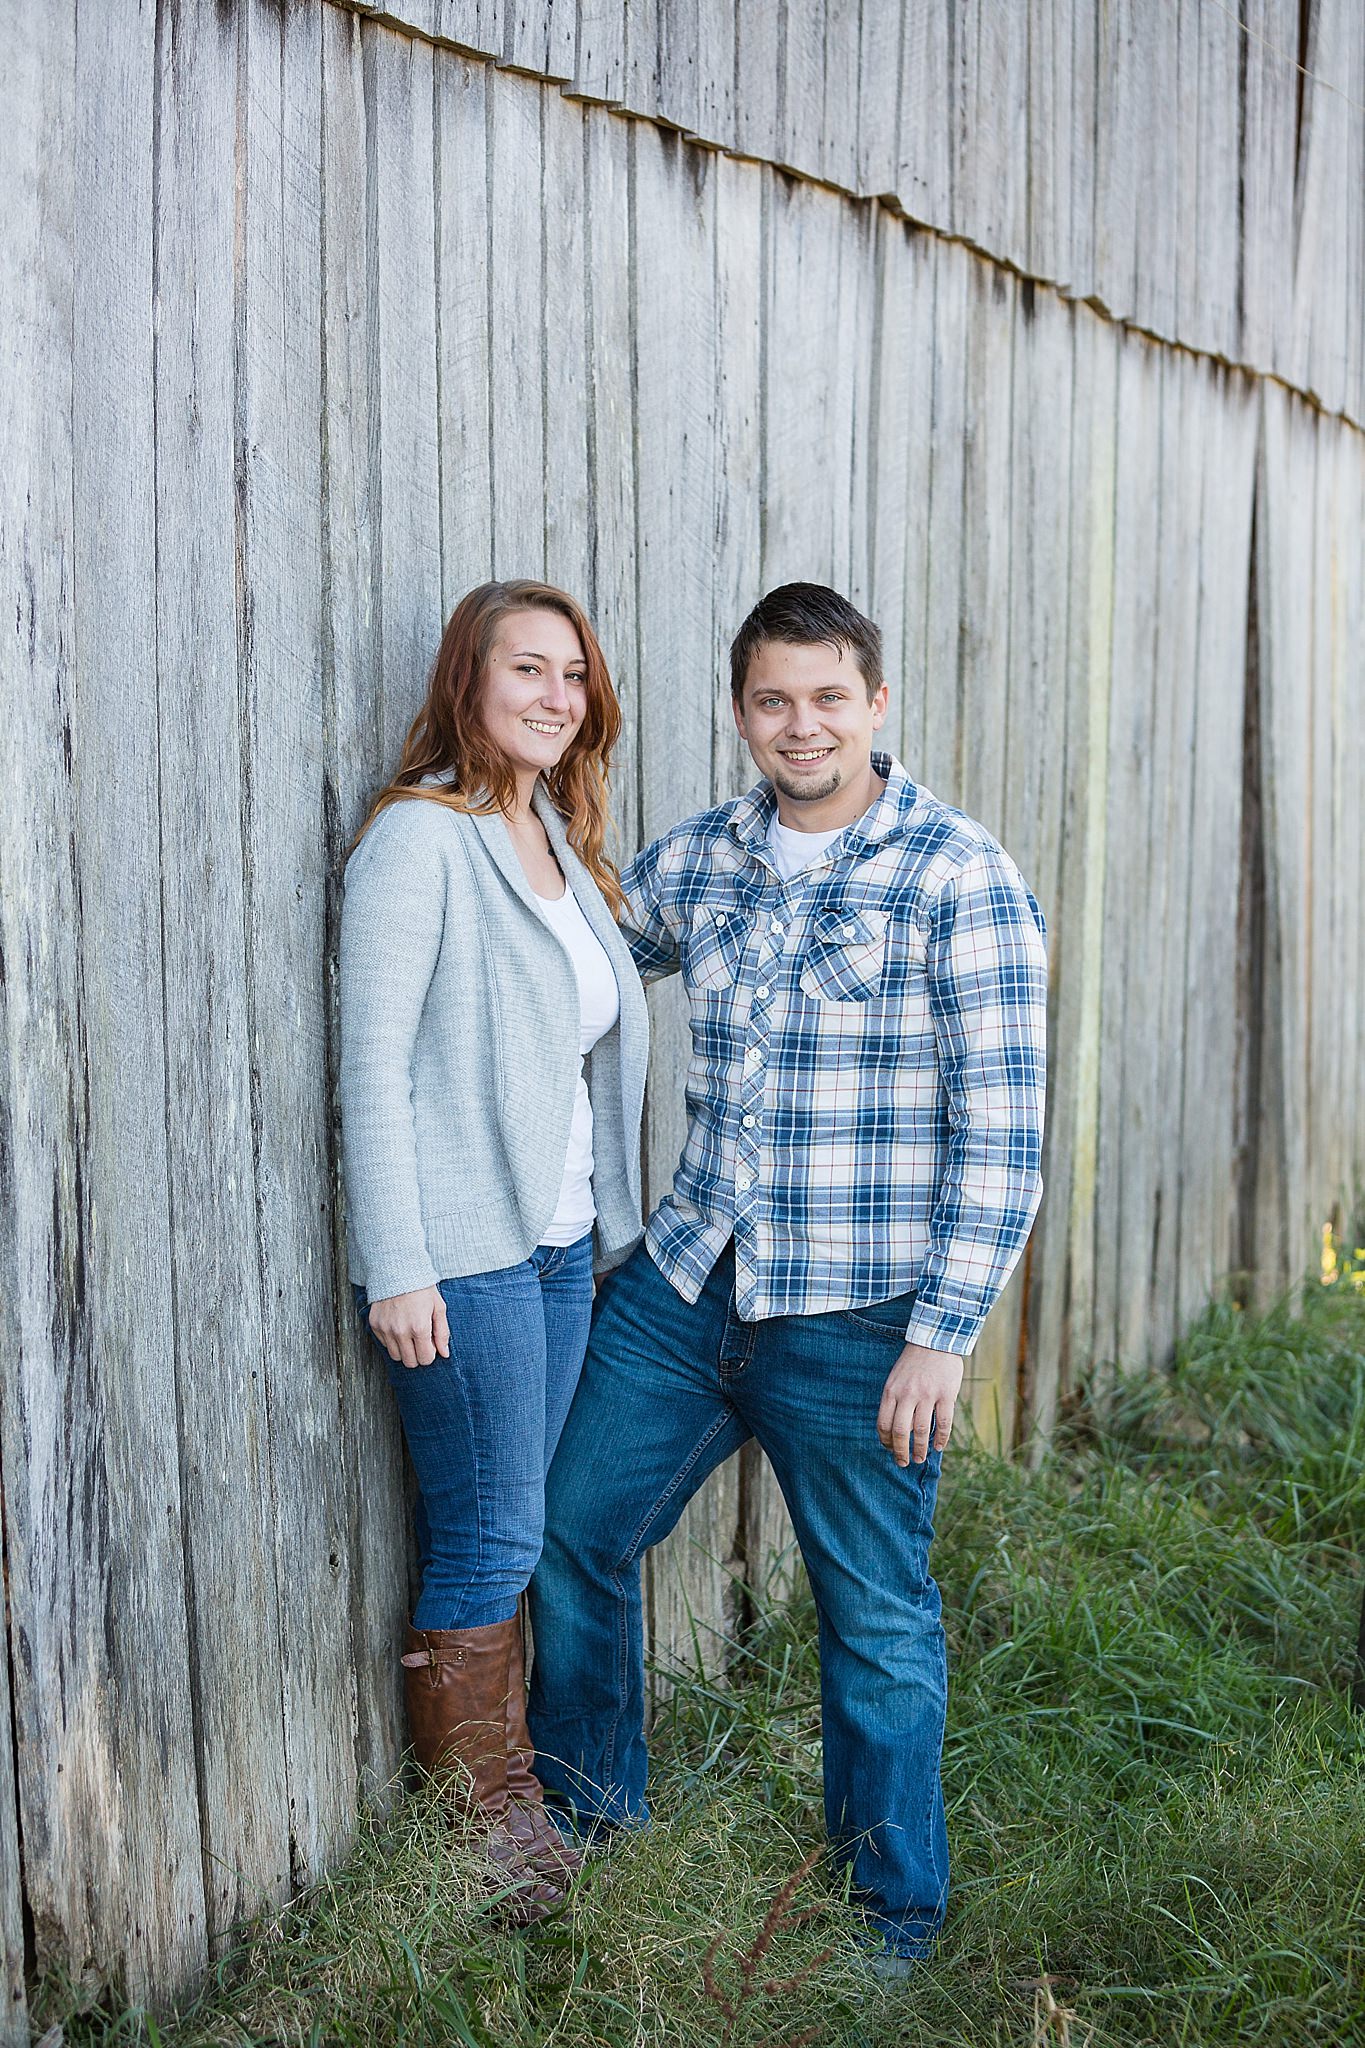 Jacob+Reanna's Engagement Session in Somerset, KY